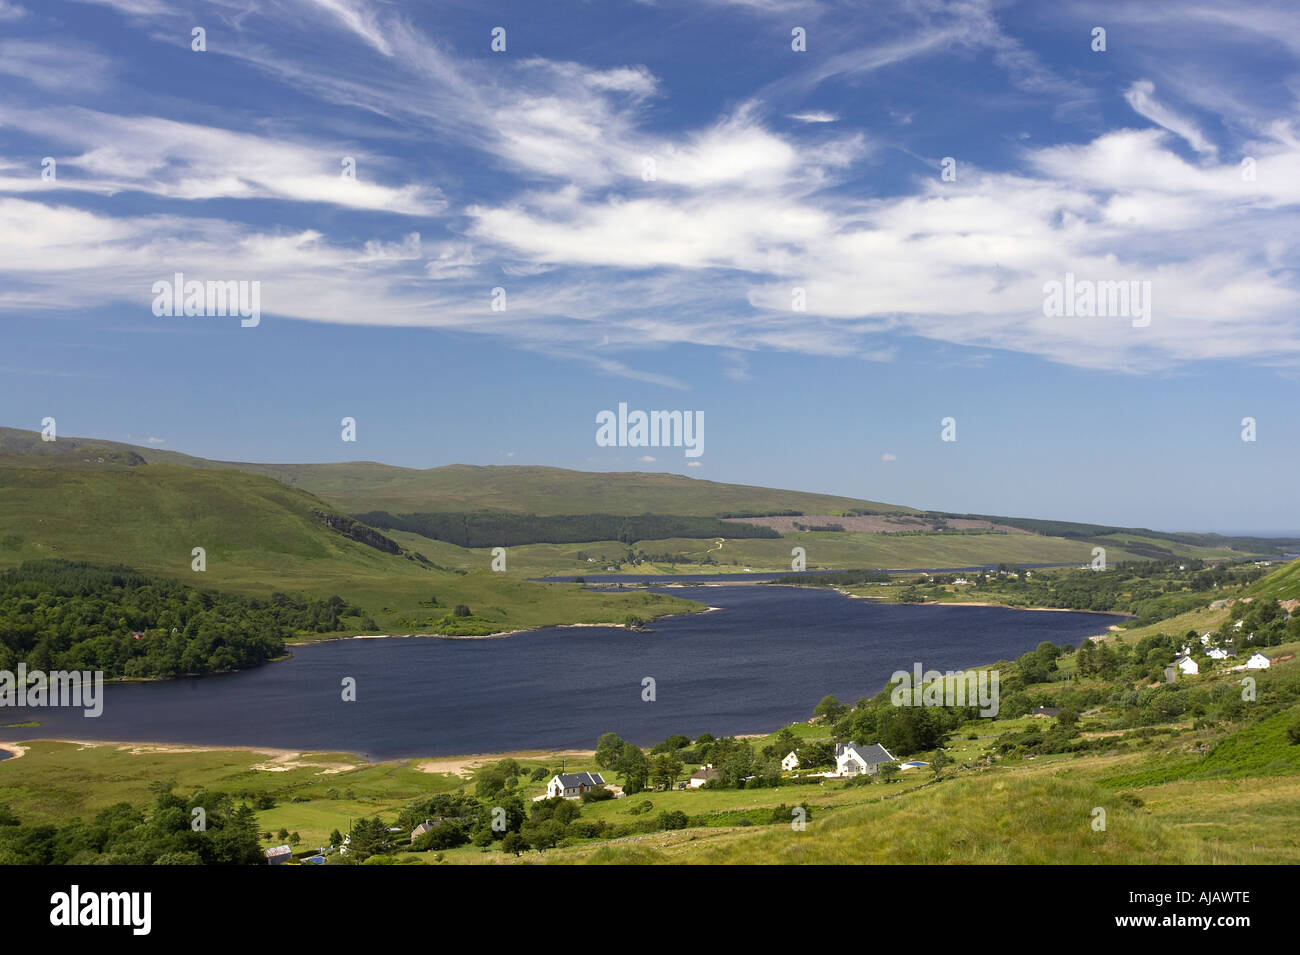 dunlewey glen valley and lakes Gweedore county Donegal Republic of Ireland Stock Photo